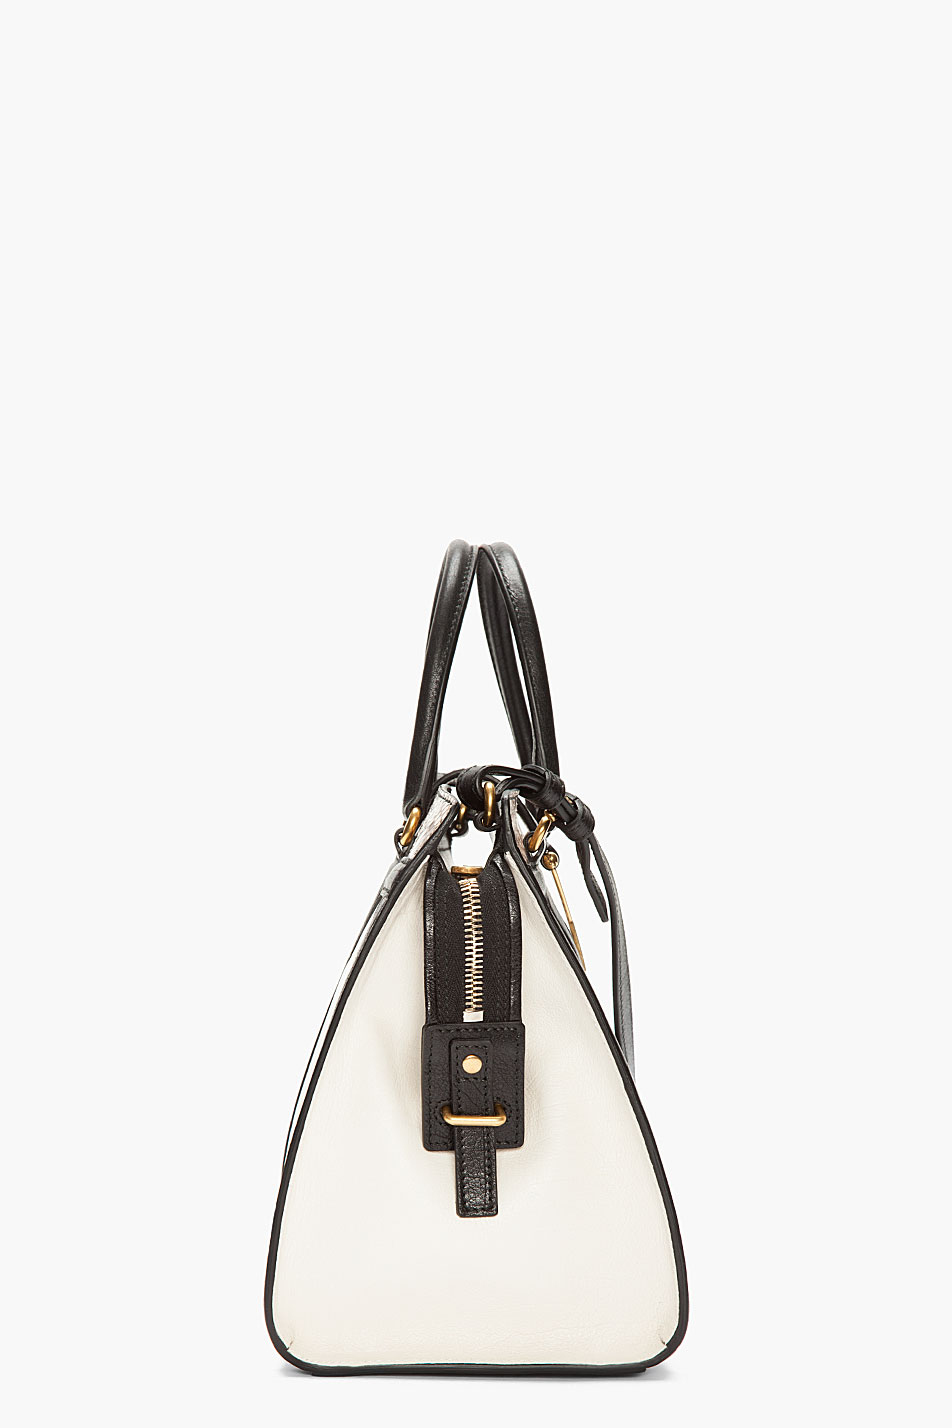 Lyst - Saint Laurent Ivory Python Leather Chyc Bag in White